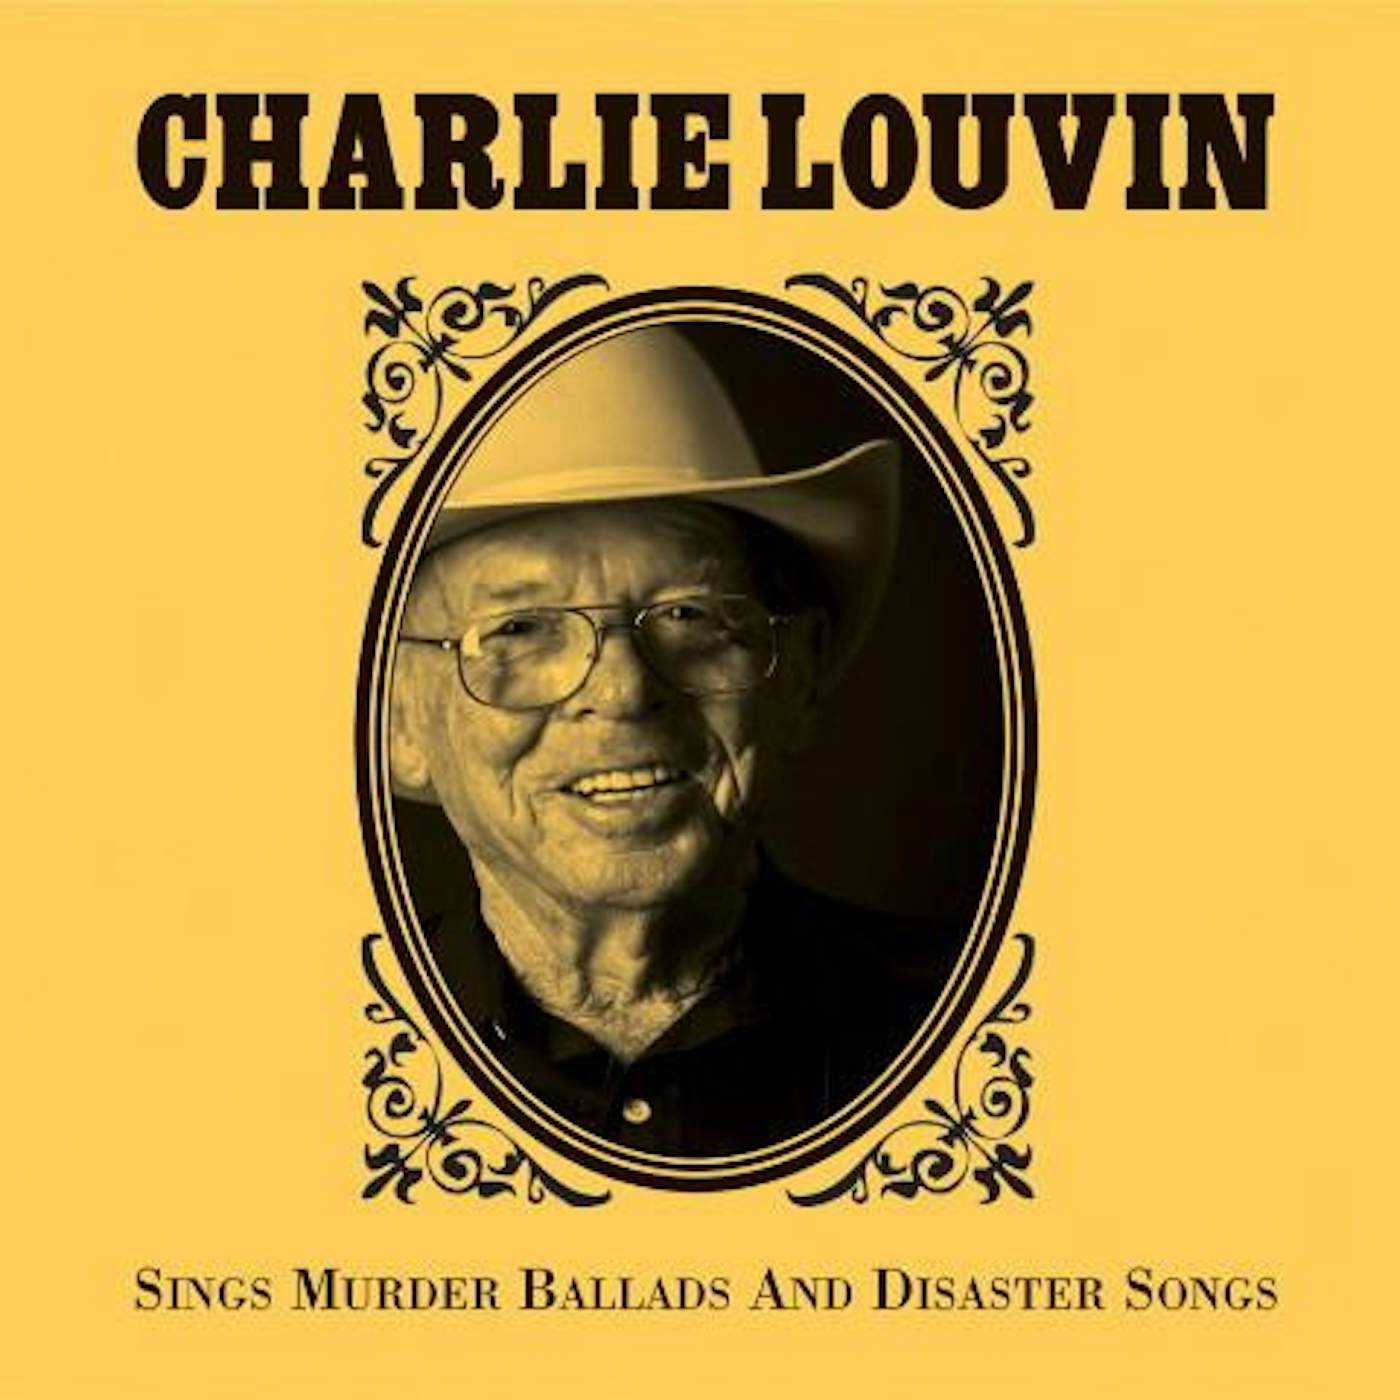 Charlie Louvin 'Sings Murder Ballads And Disaster Songs'